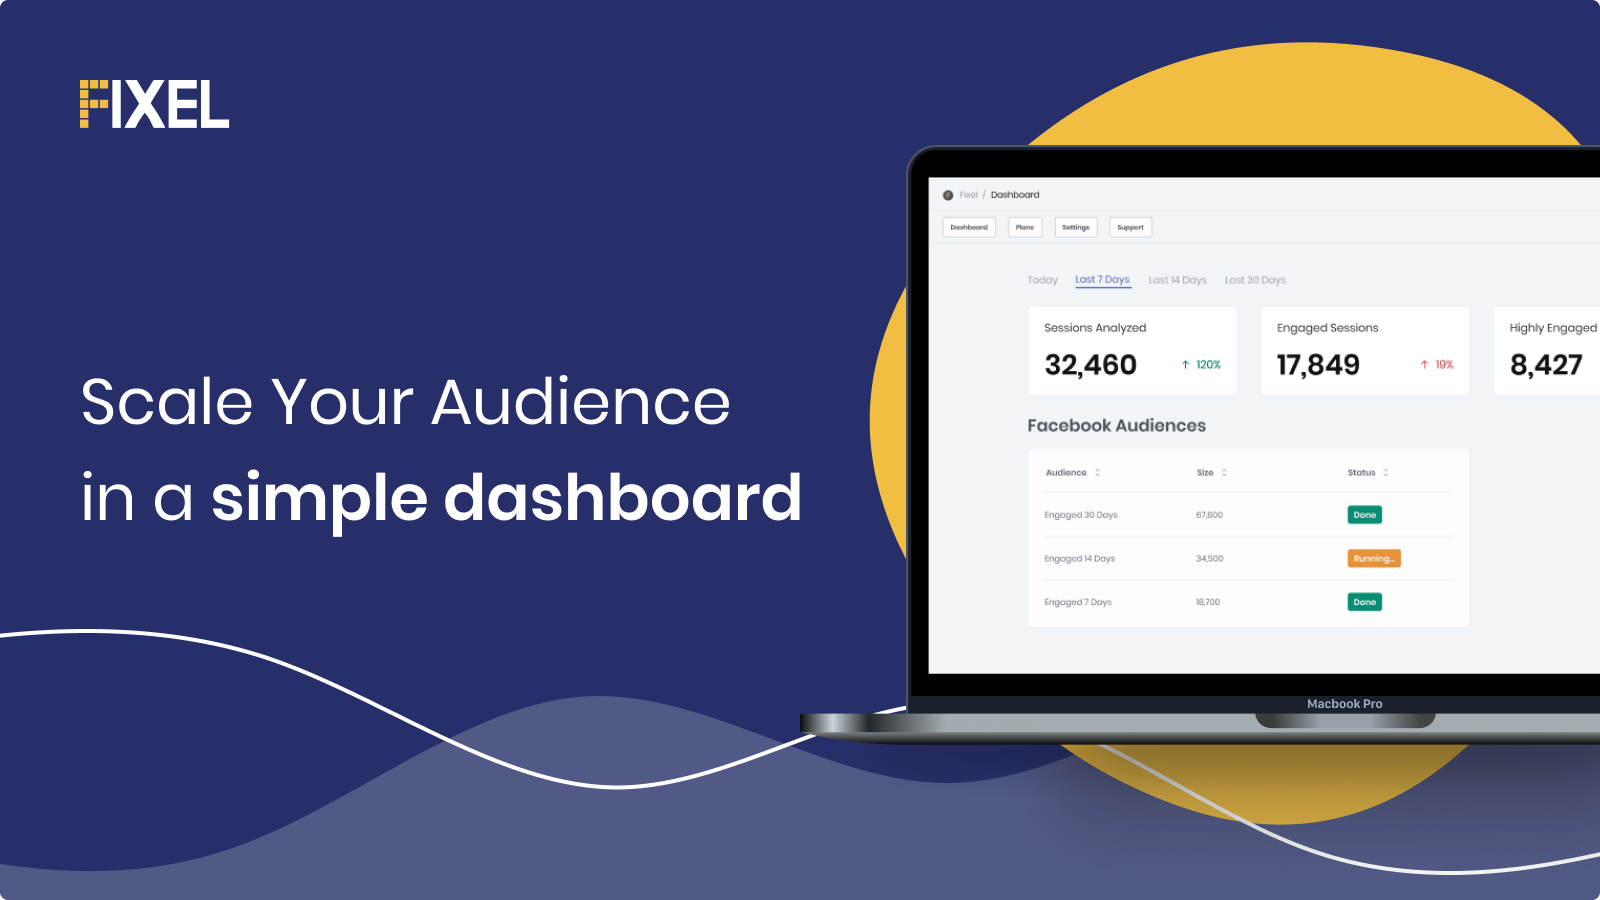 Manage all your audiences in one place